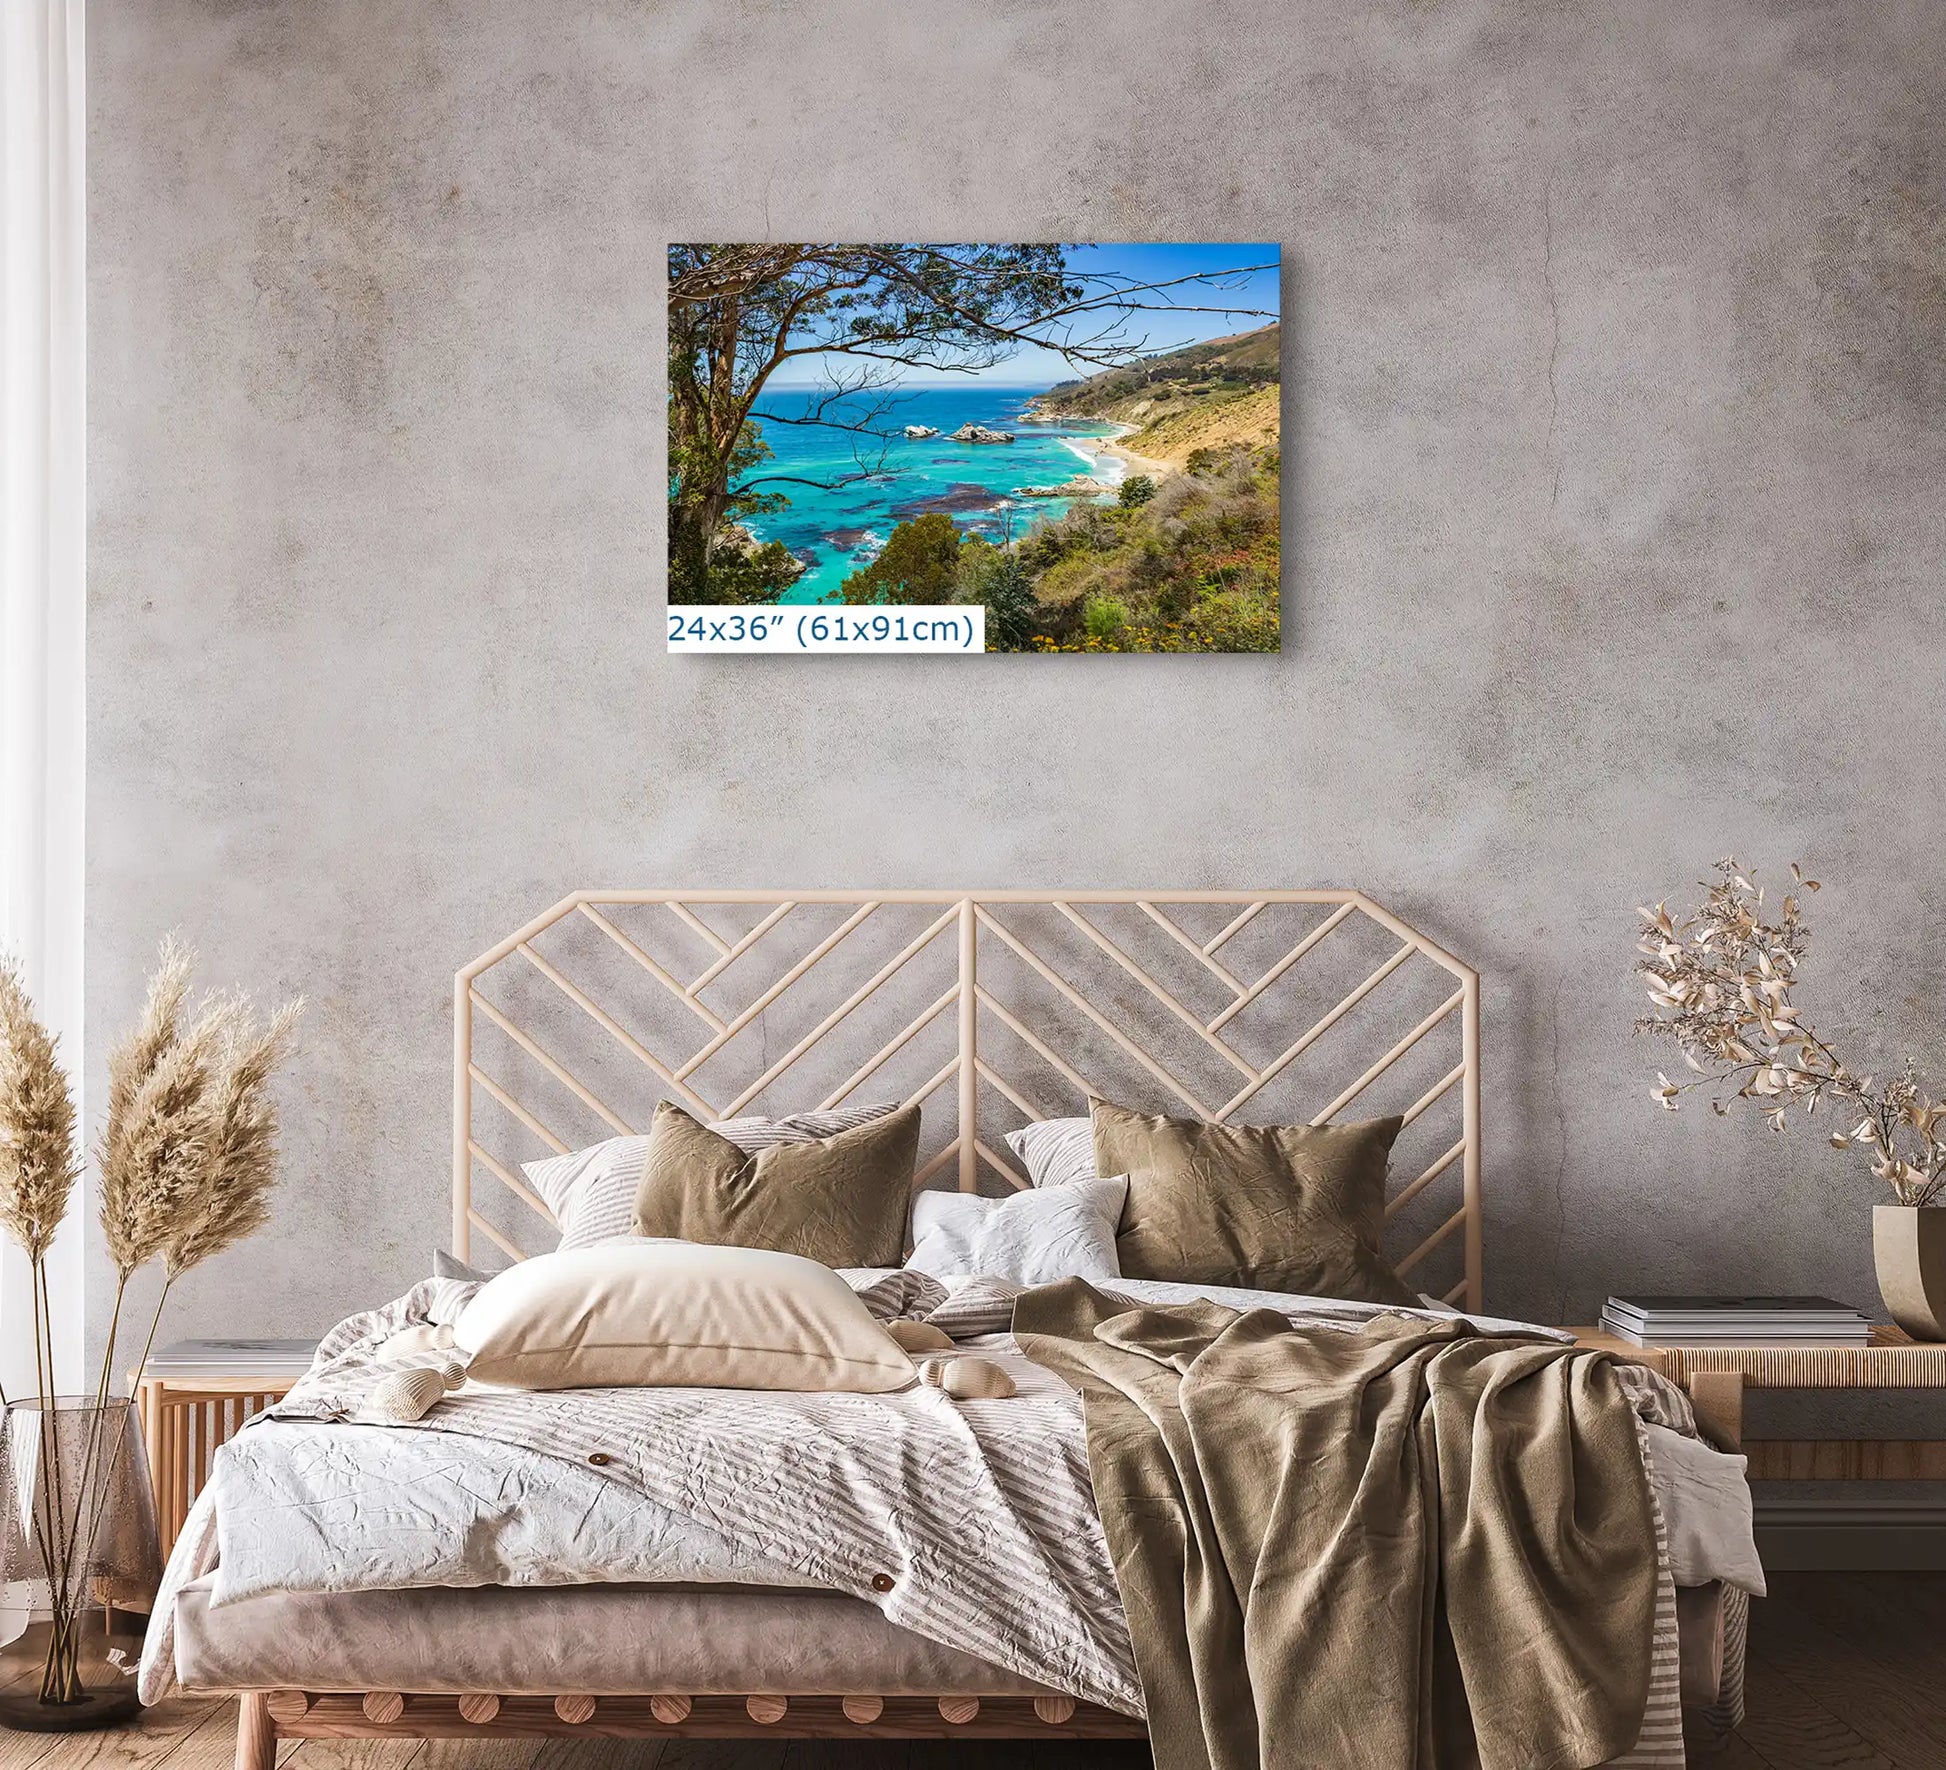 Big Sur California ocean seascape wall art shown in 24x36-inch over bed